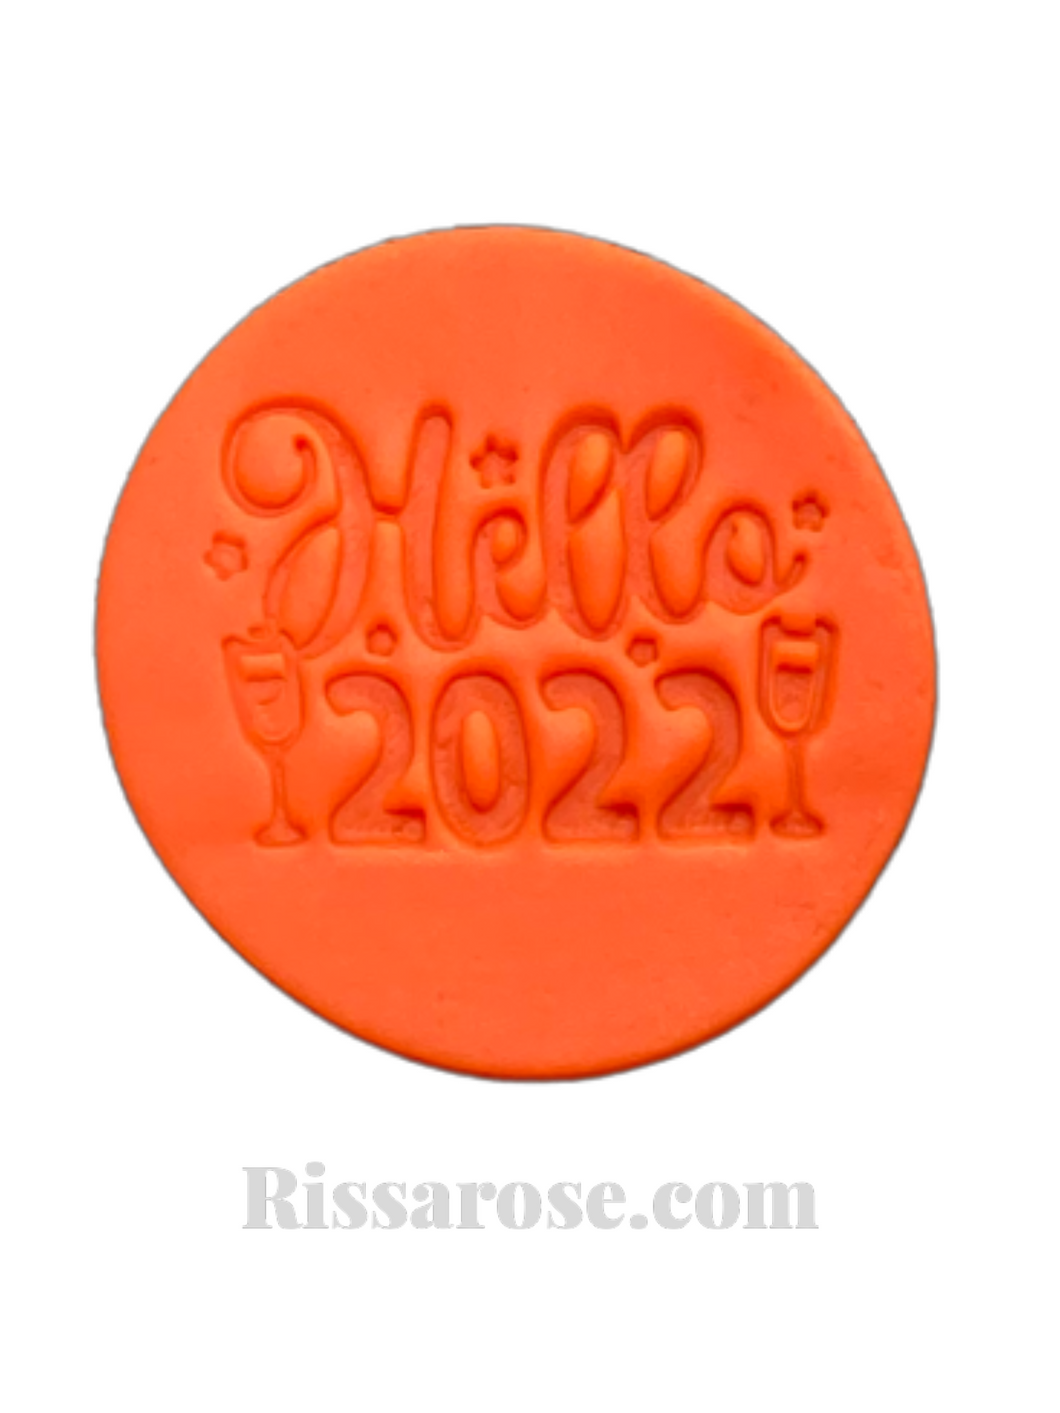 happy new year 2022 cookie fondant stamps embosse wine glass chin chin 2022 fireworks celebrition hello 2022 chin chin